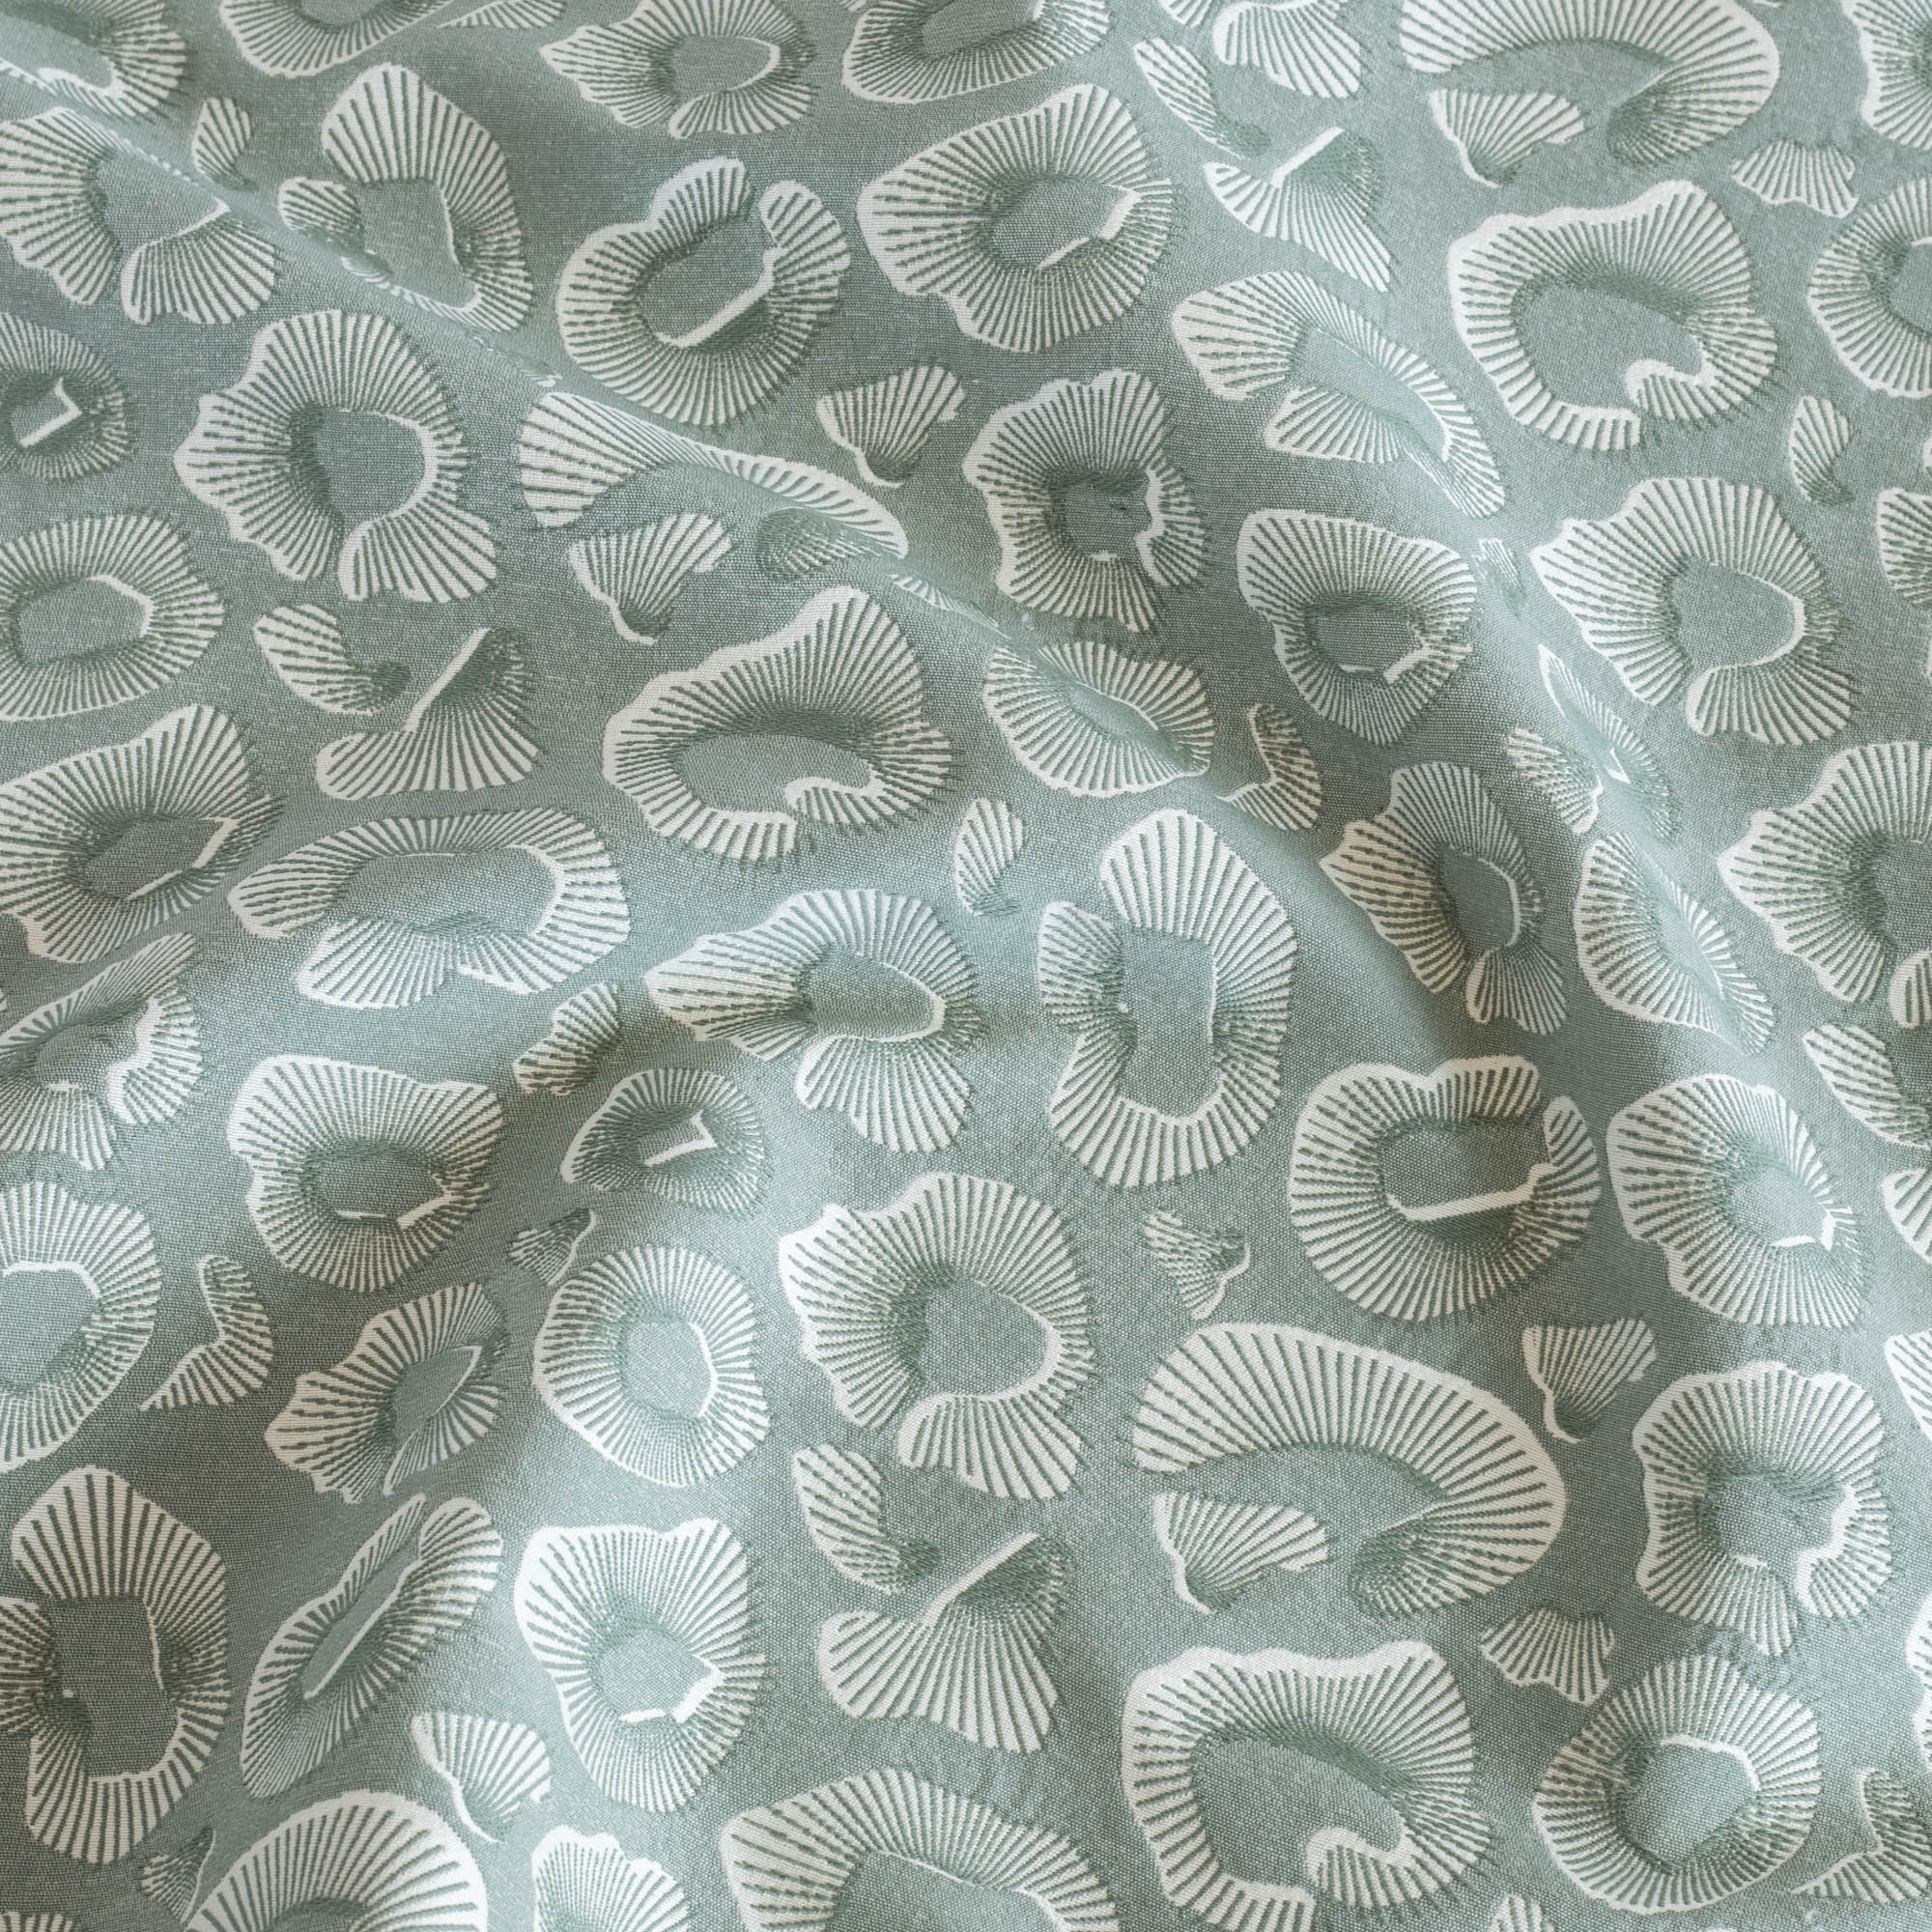 Ocean Jade, a blue green and white abstract ocean motif pattern fabric from Tonic Living